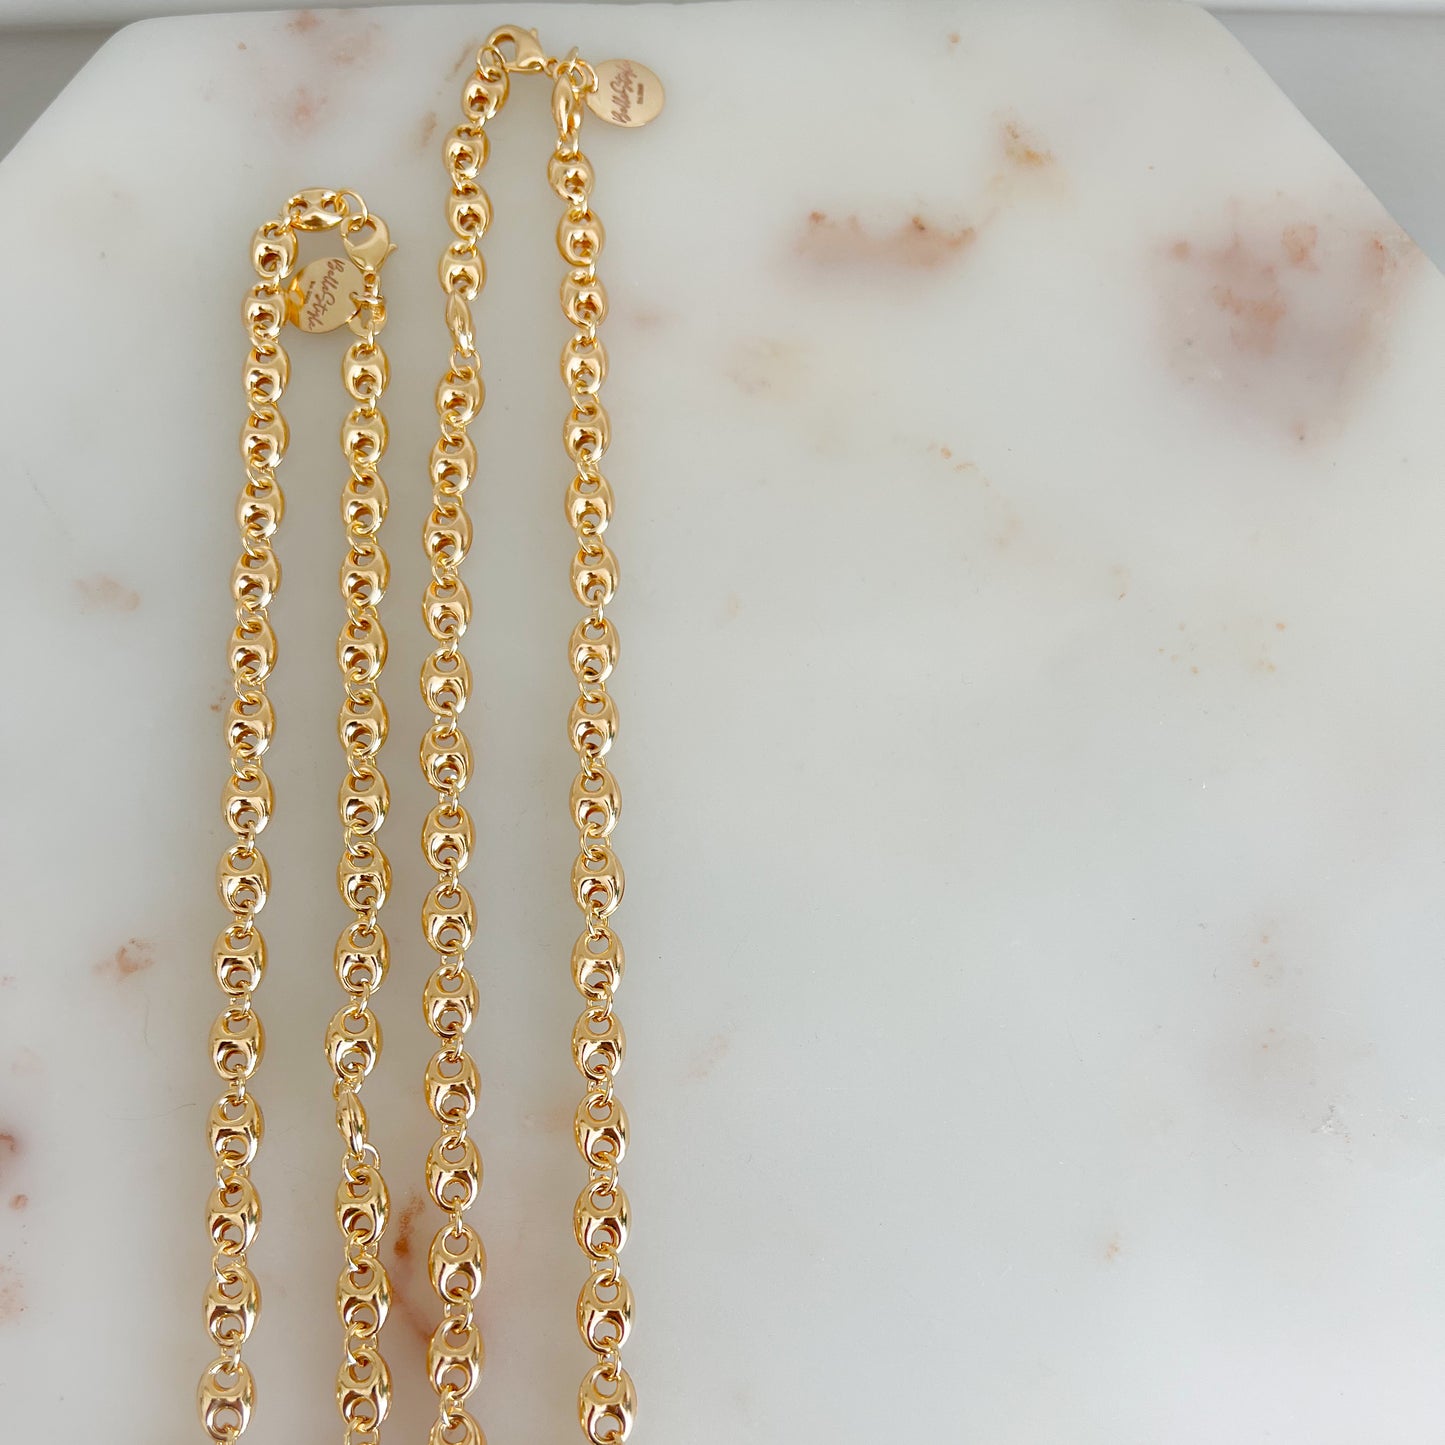 Soda Tab Small 5mm Gold Filled Chain Necklace